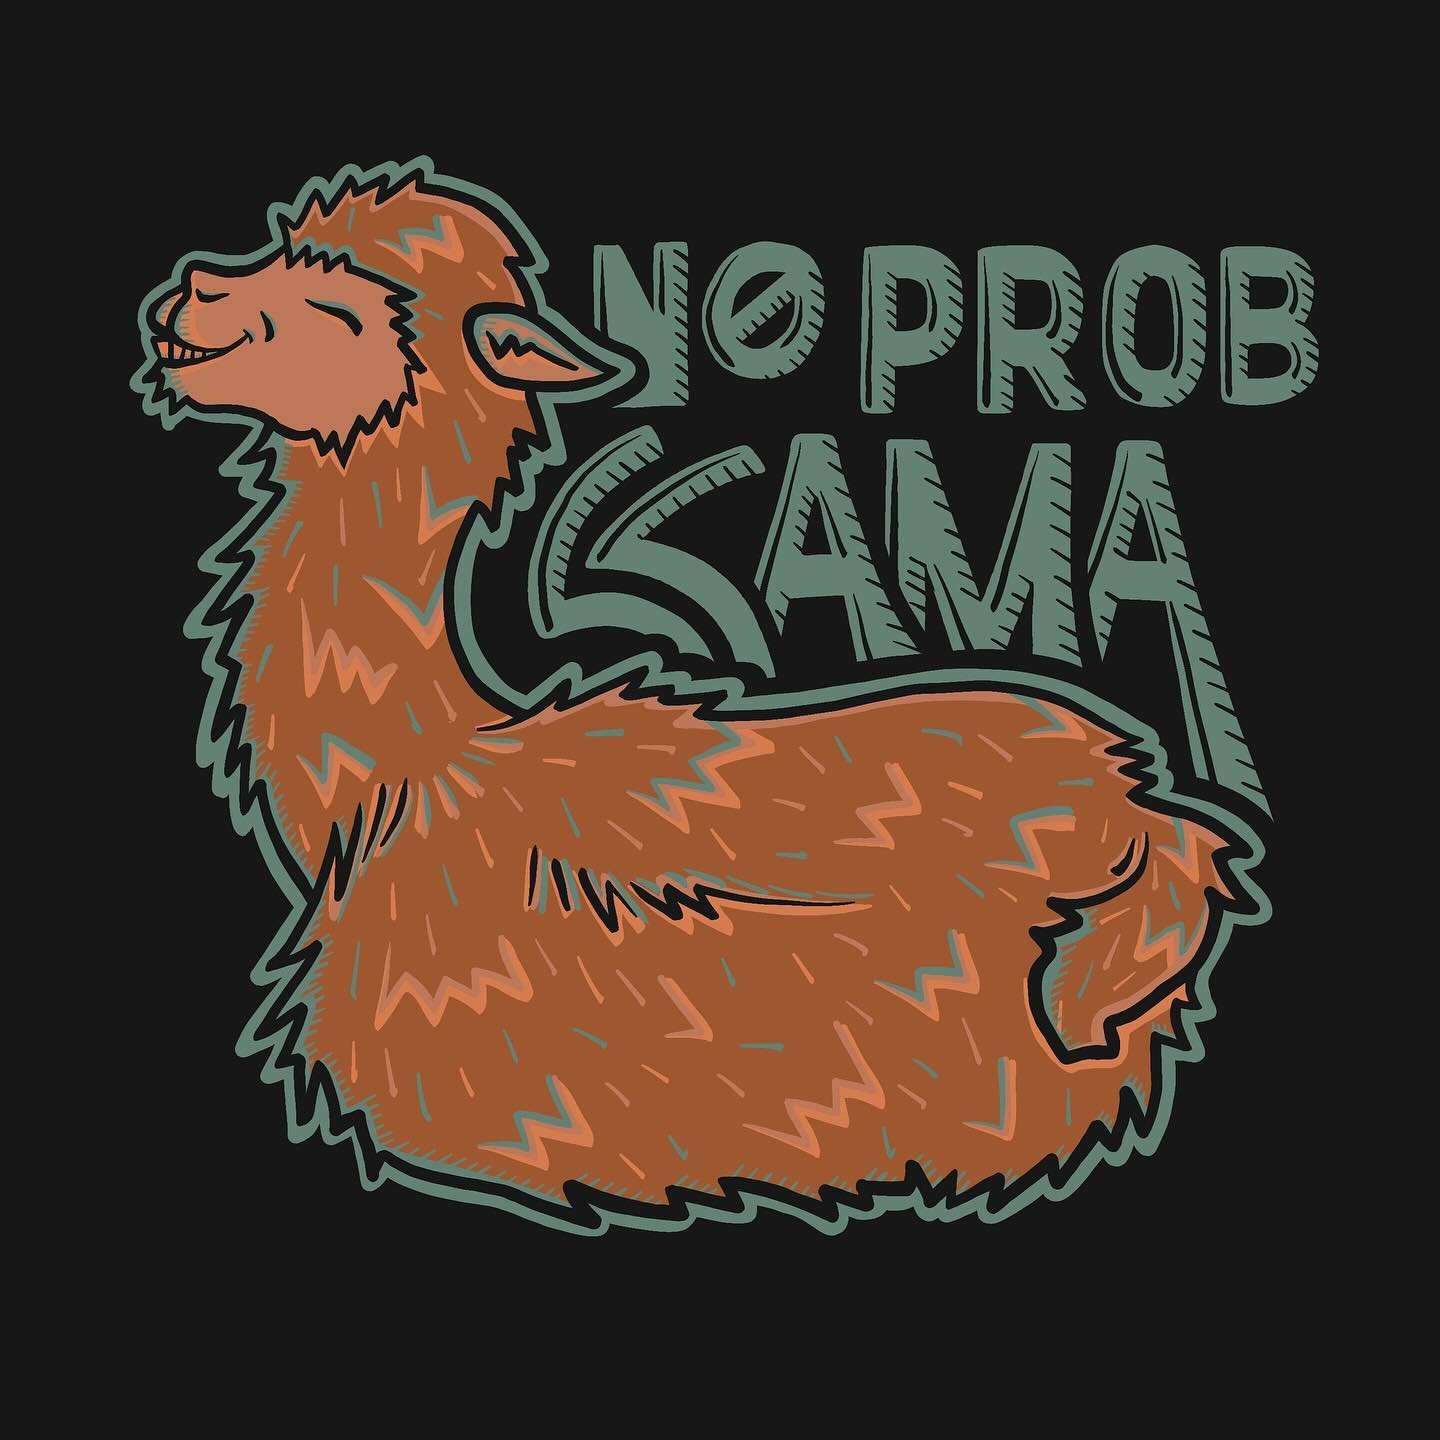 NO PROB-LLAMA, LLAMA 🦙 

Refreshed a Llama illustration I did when I first bought my iPad and was experimenting with brushes, colors, and the feel of digital drawing (see last slide).

Which refresh do you like better?